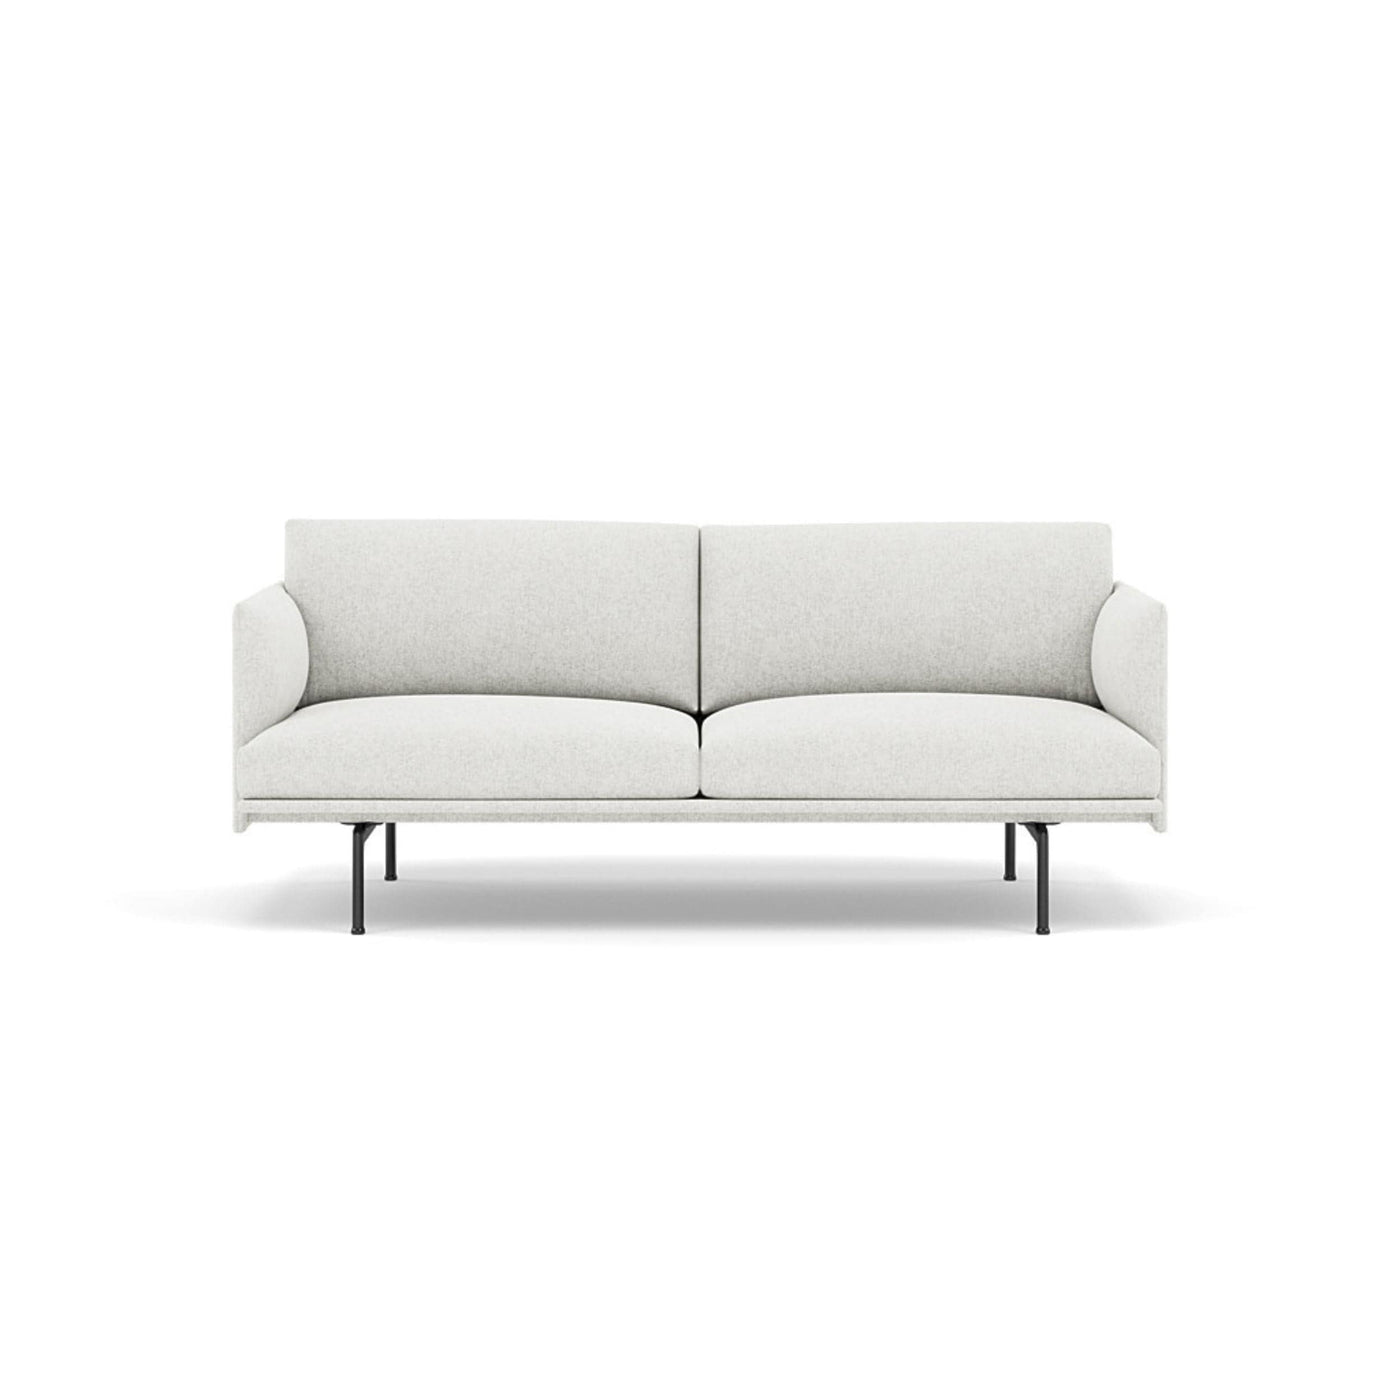 Muuto Outline Studio Sofa 170 in hallingdal 110 and black legs. Made to order from someday designs. #colour_hallingdal-110